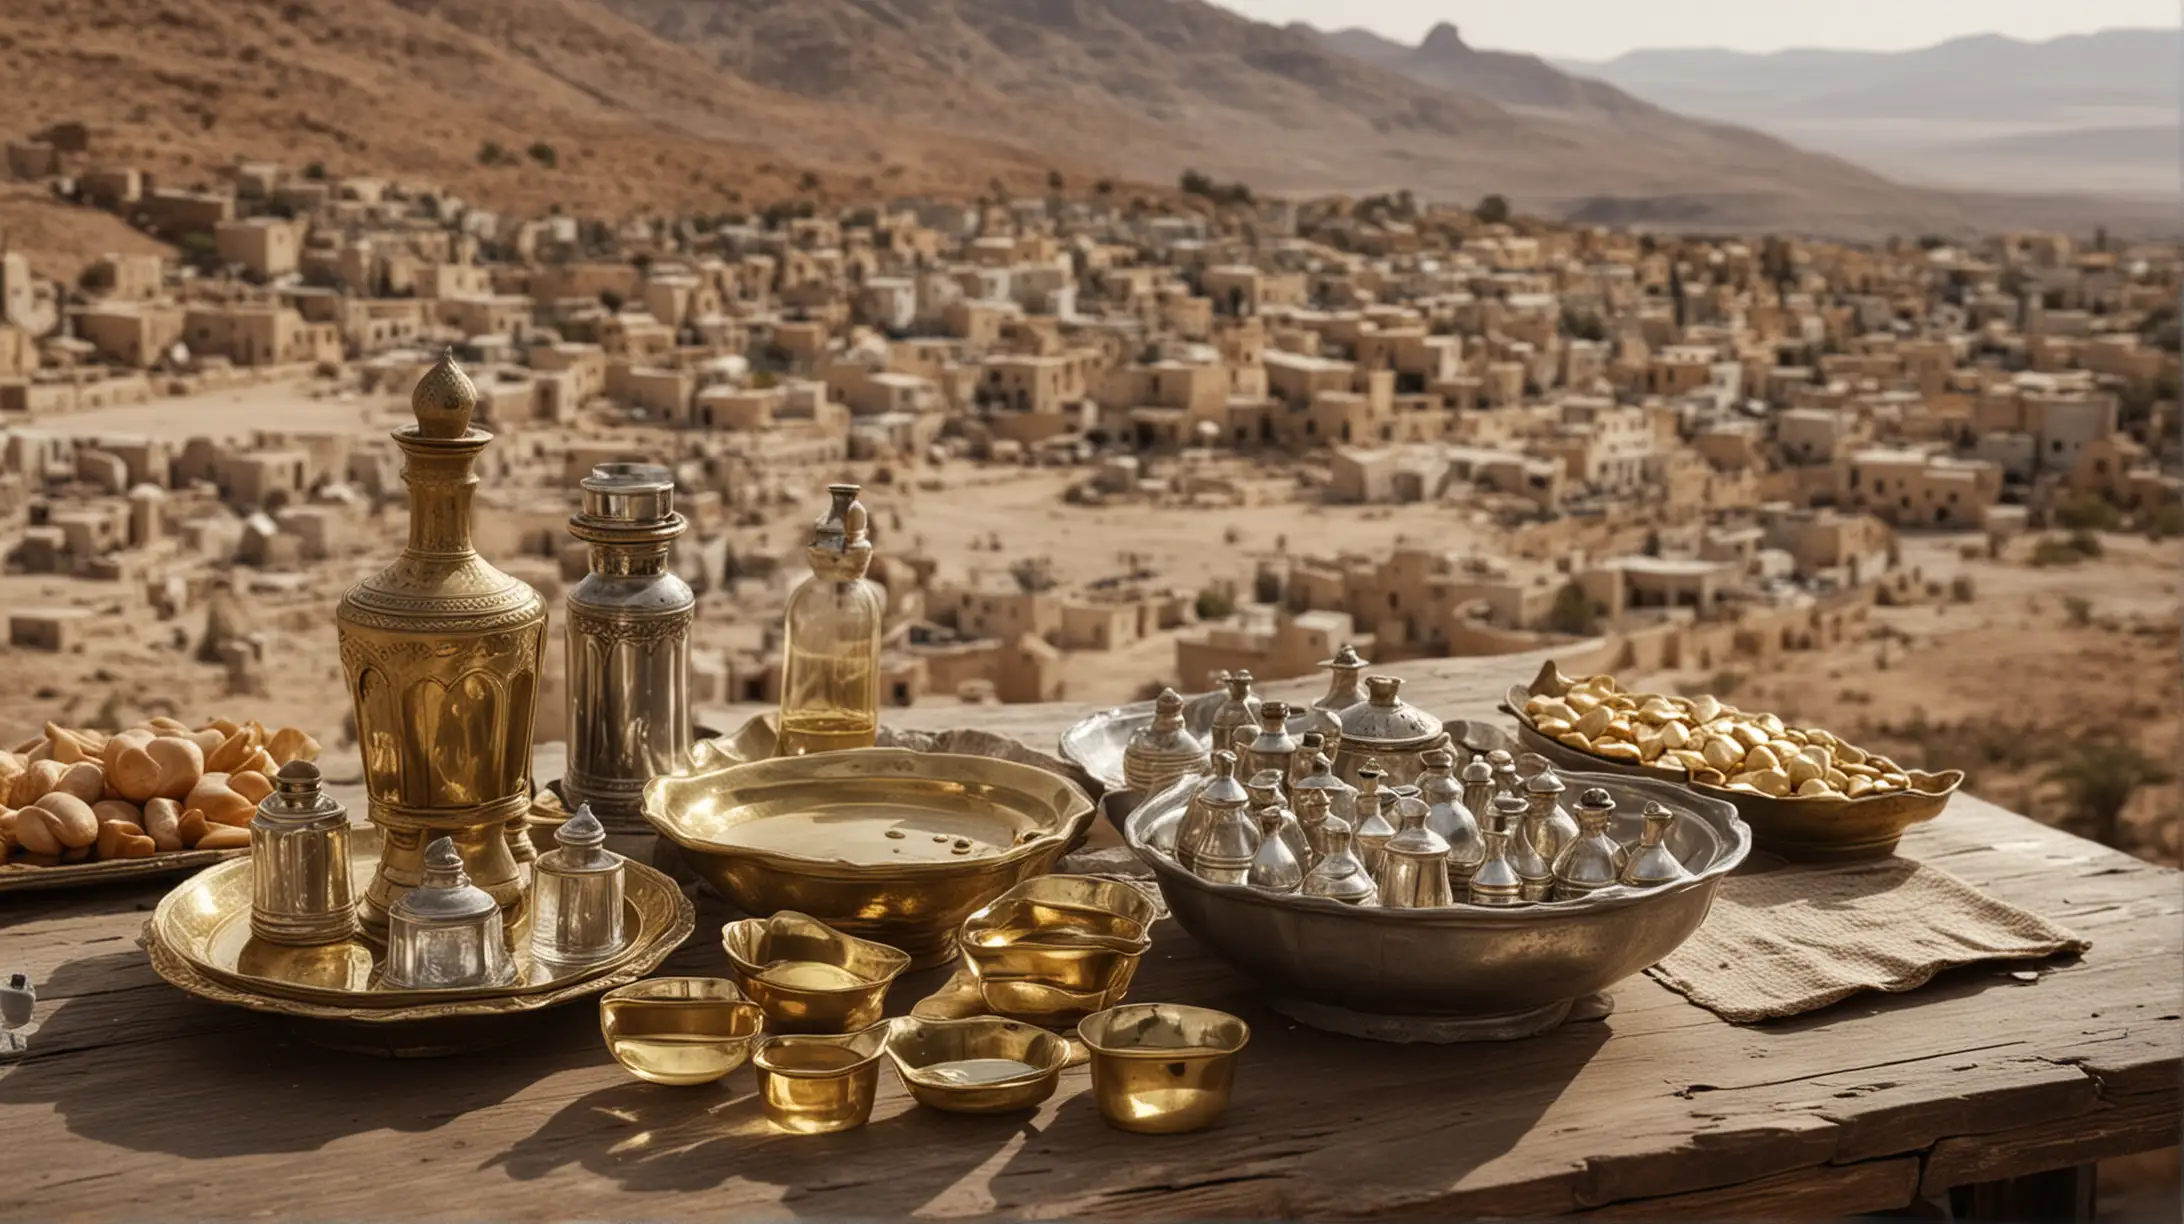 Ancient Table with Gold and Silver Bowls in Biblical Moses Era Village